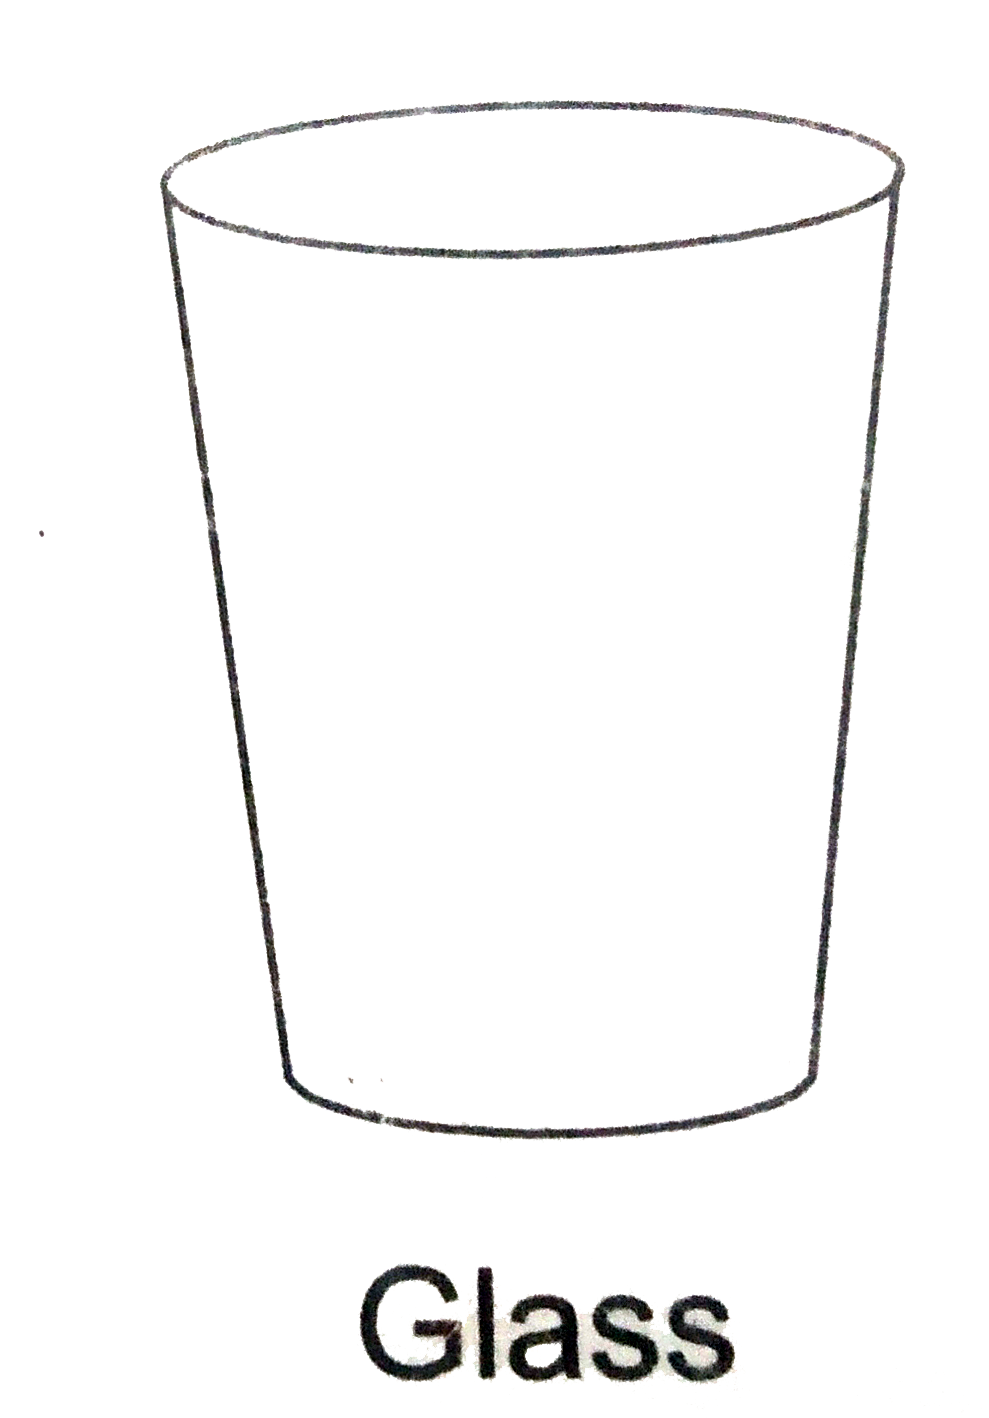 The shape of a glass (tumbler) is usually in the form of